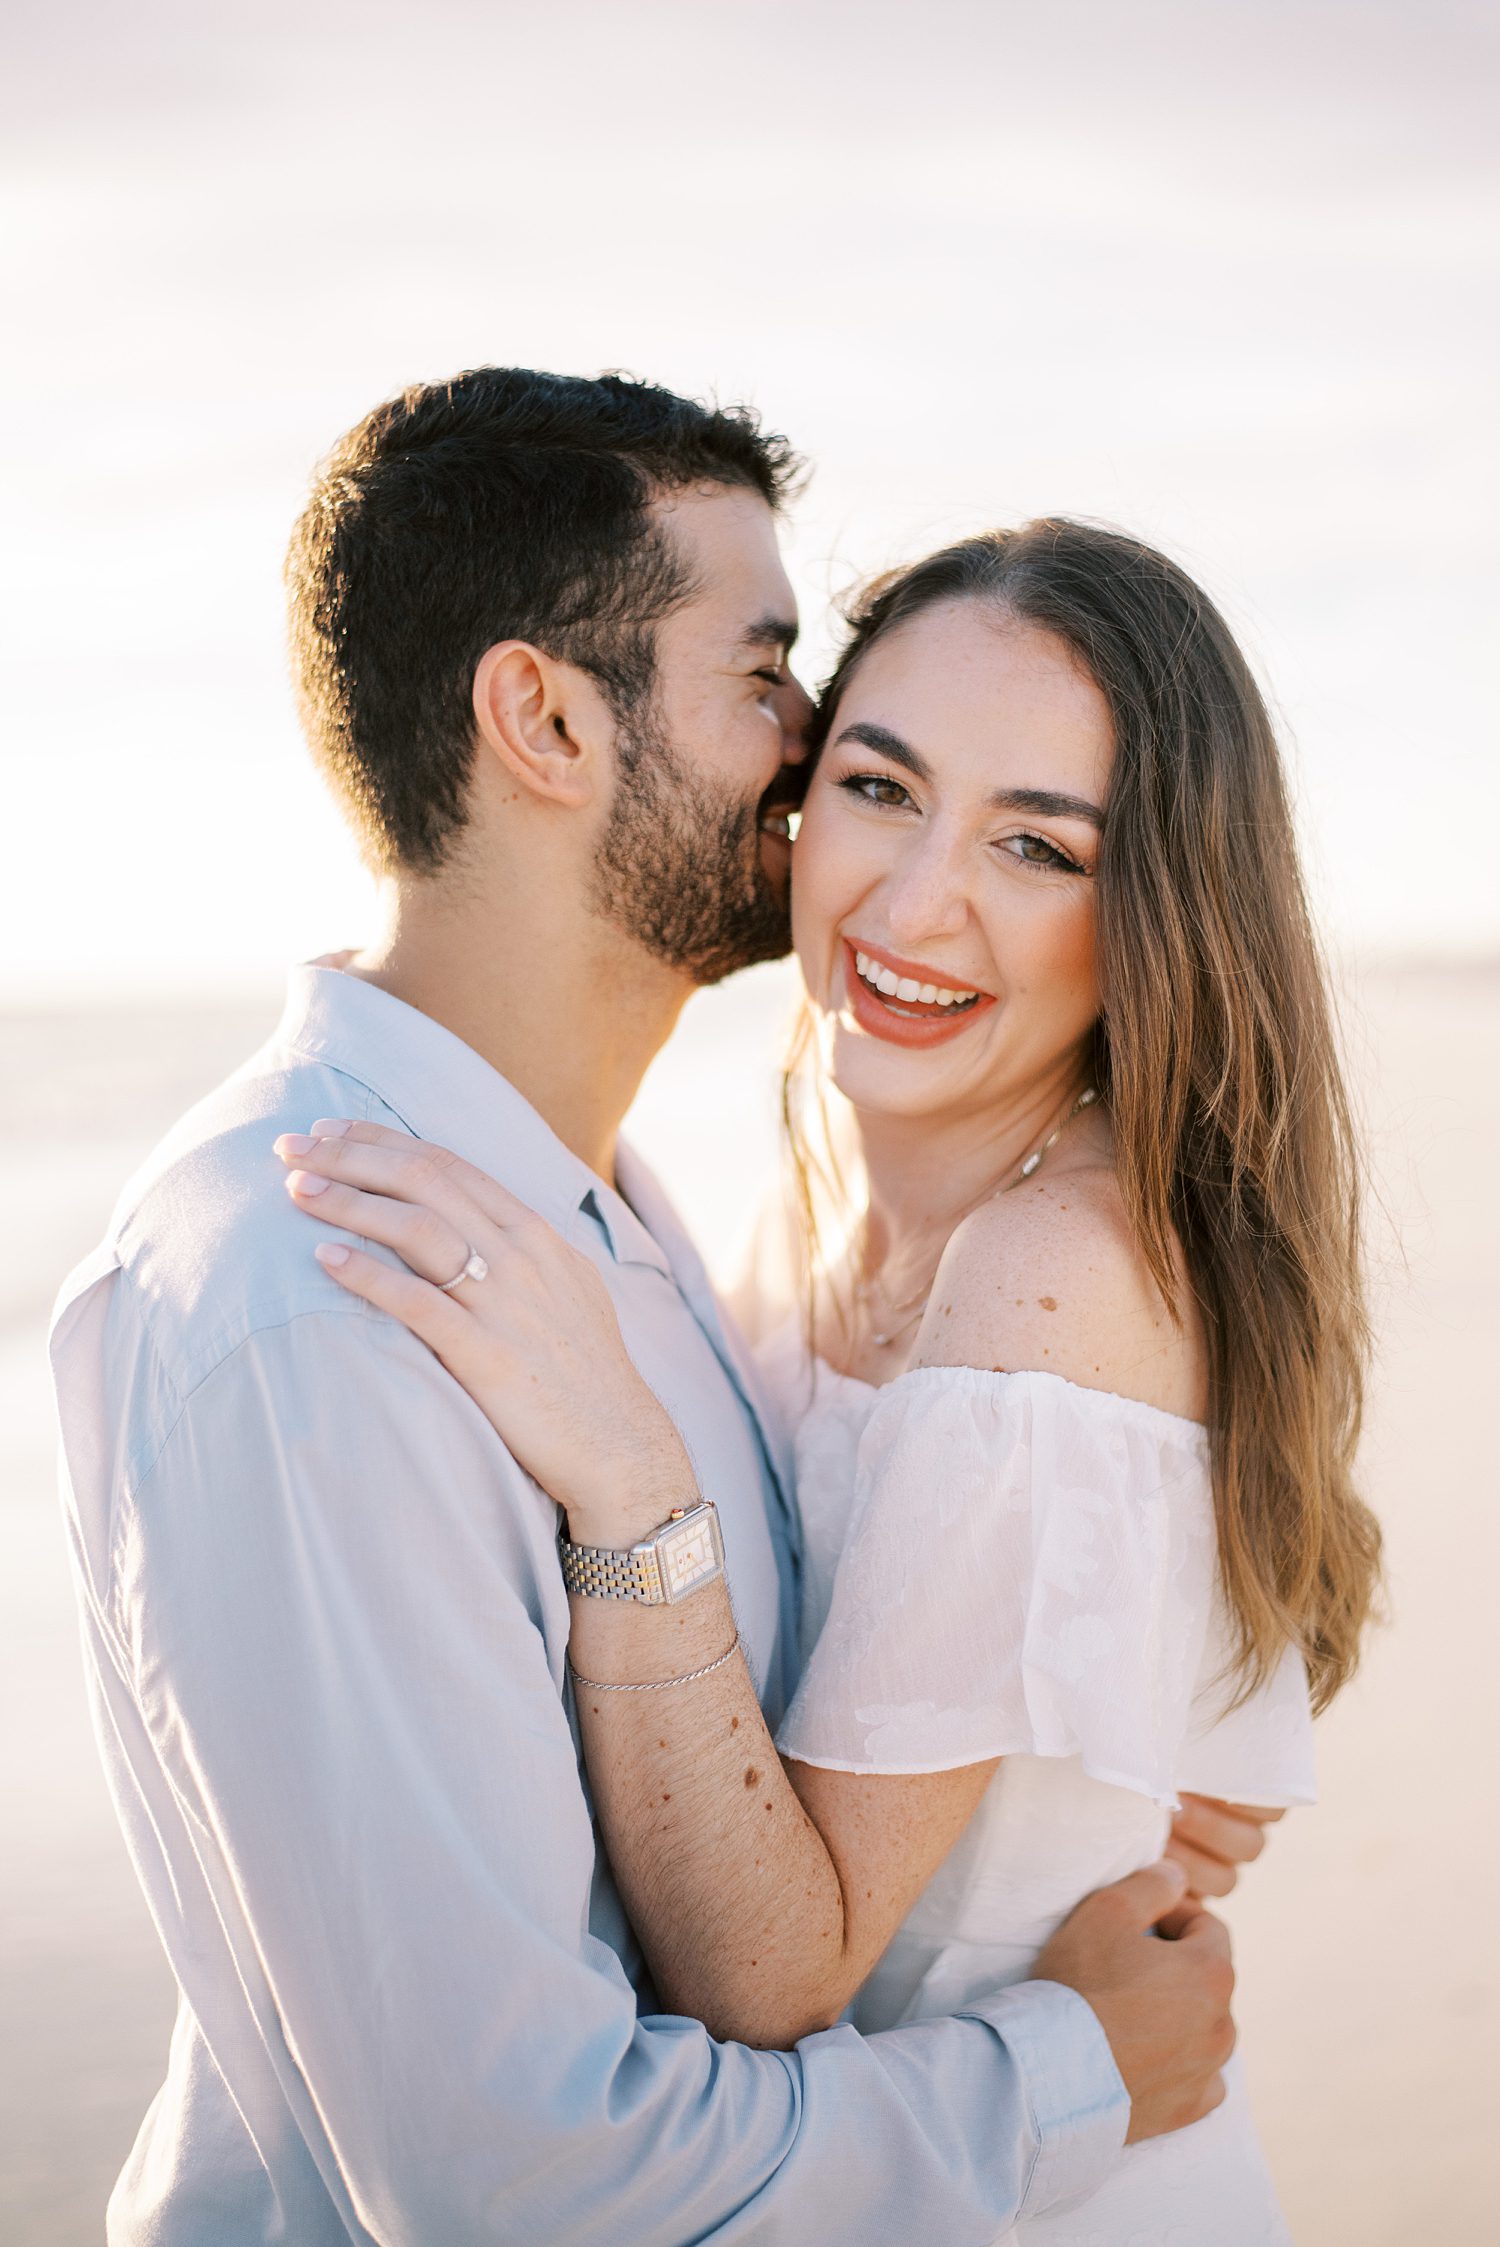 man kisses woman's cheek on beach at sunset during Tampa FL engagement photos